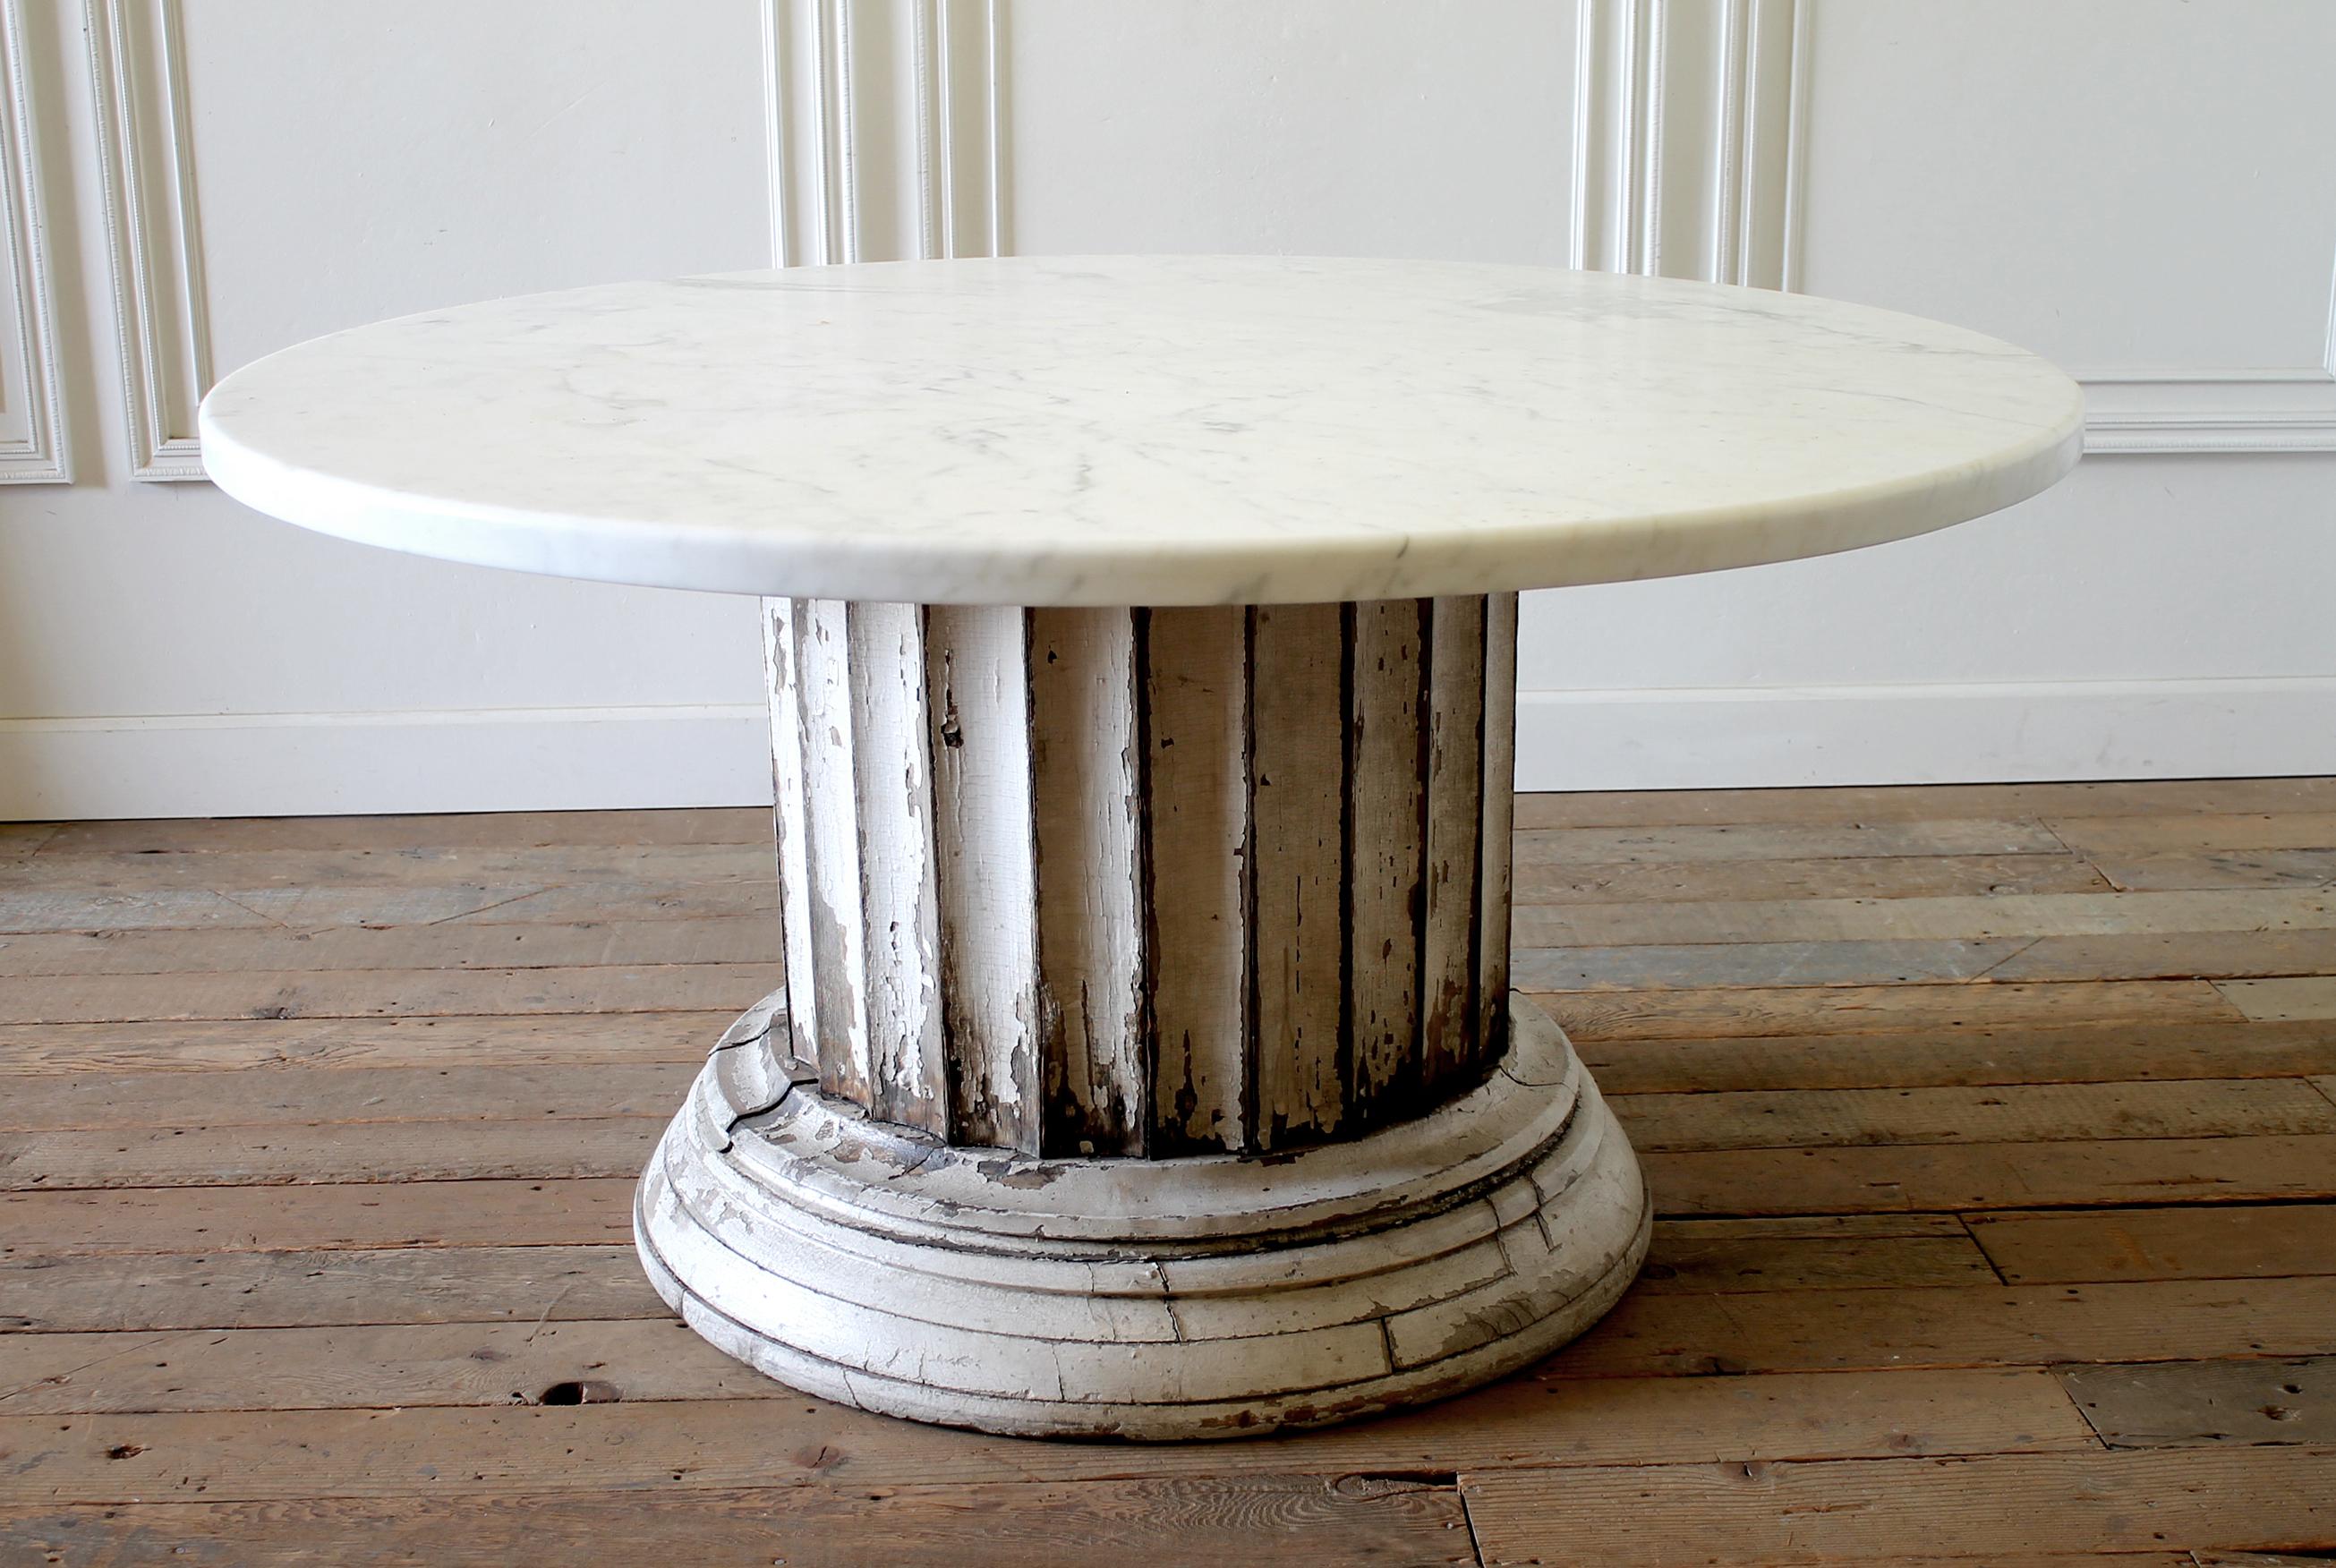 Antique column pedestal dining table original paint Calcutta gold marble top
150 year old column base salvaged from a home in CT. This column was 50 ft. tall originally, we purchased this column to have it cut down into a dining table